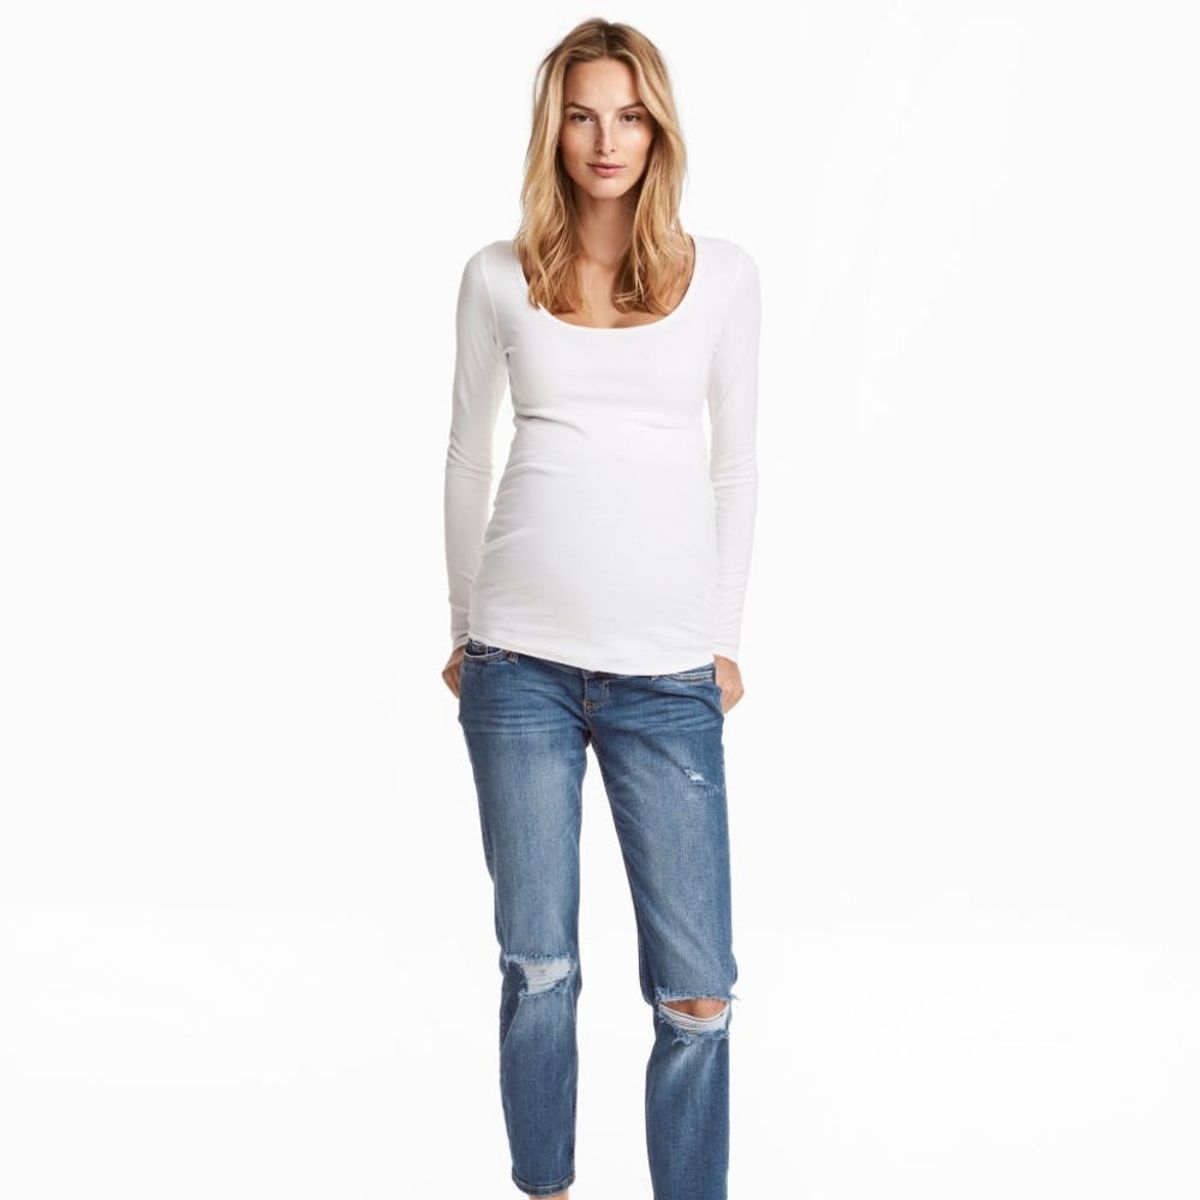 9 Maternity Jeans You Won’t Mind Wearing